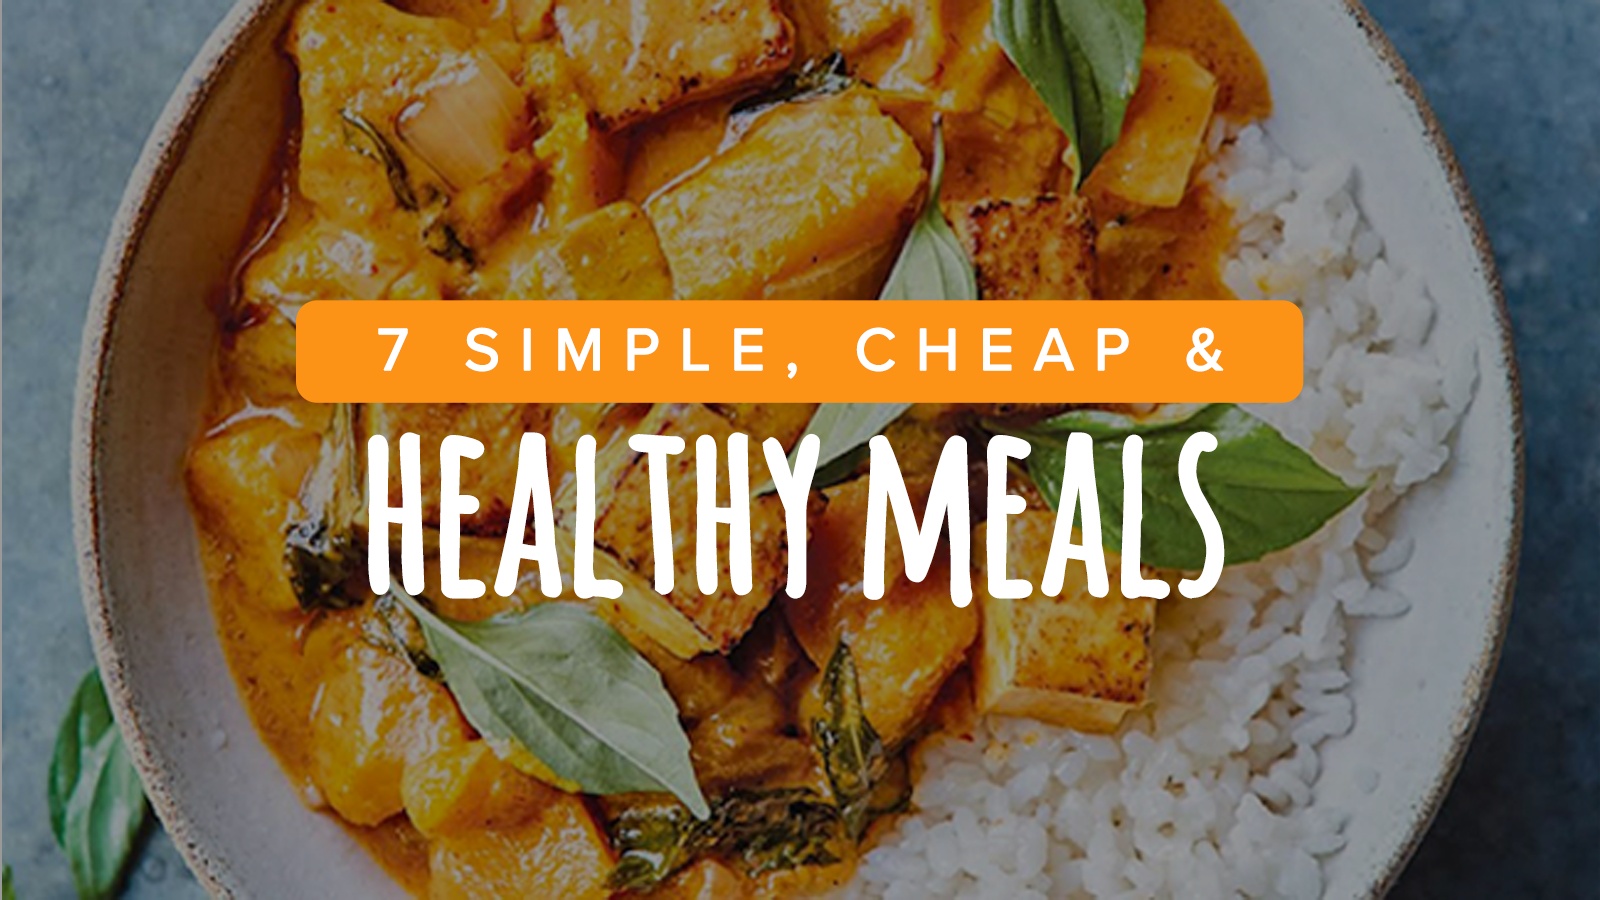 7 Simple, Cheap & Healthy Meals